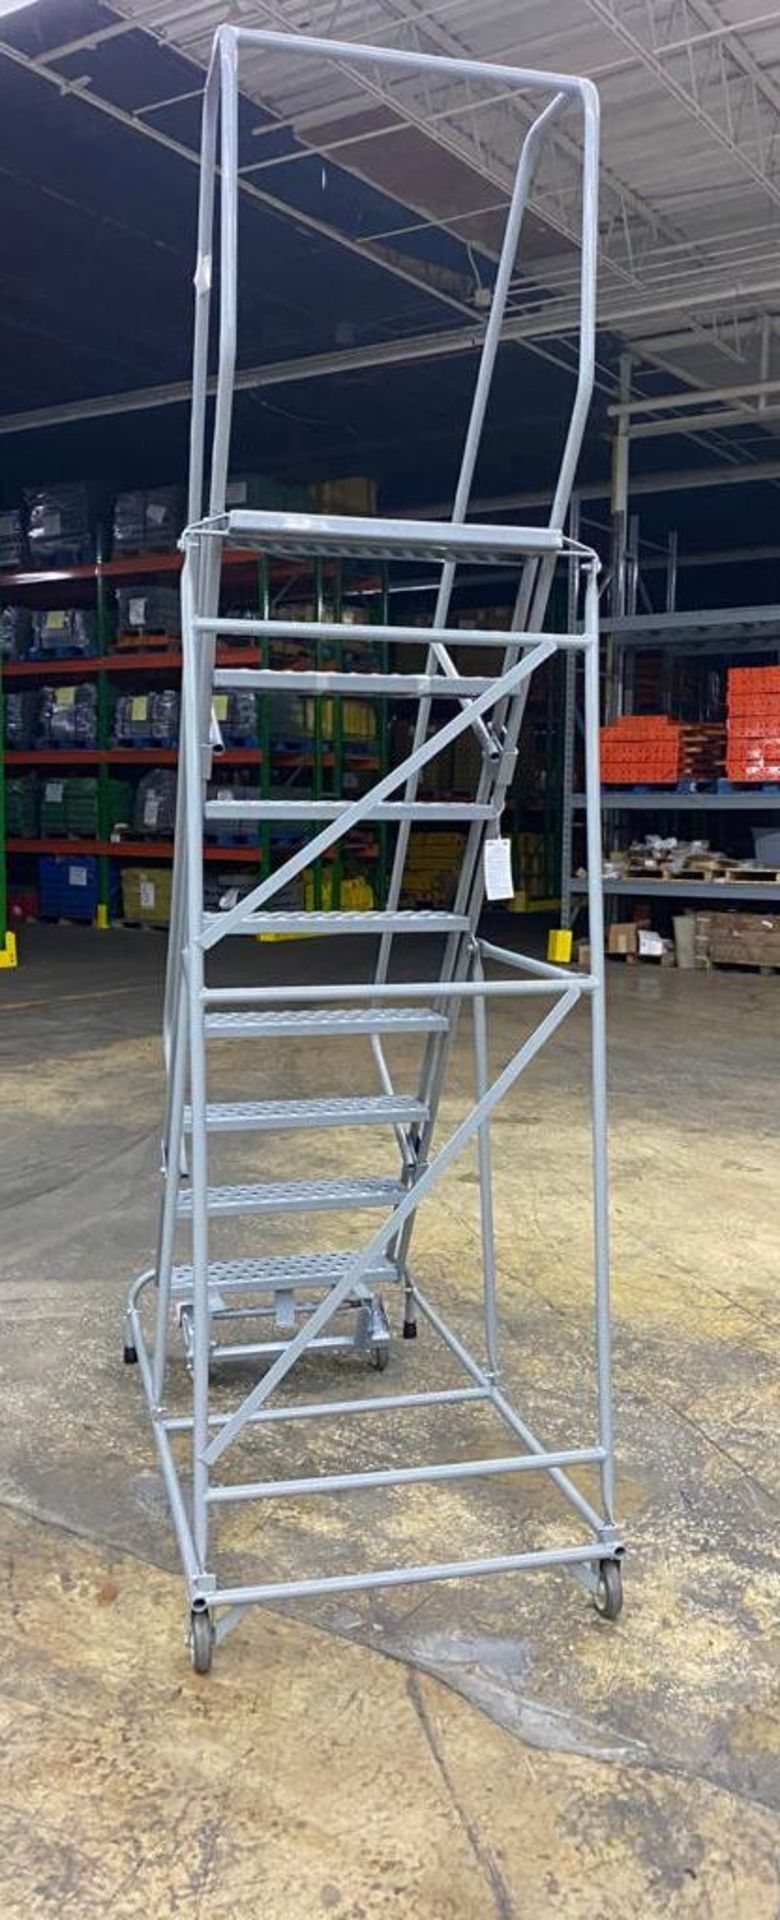 NEW 10 STEP ROLLING LADDER